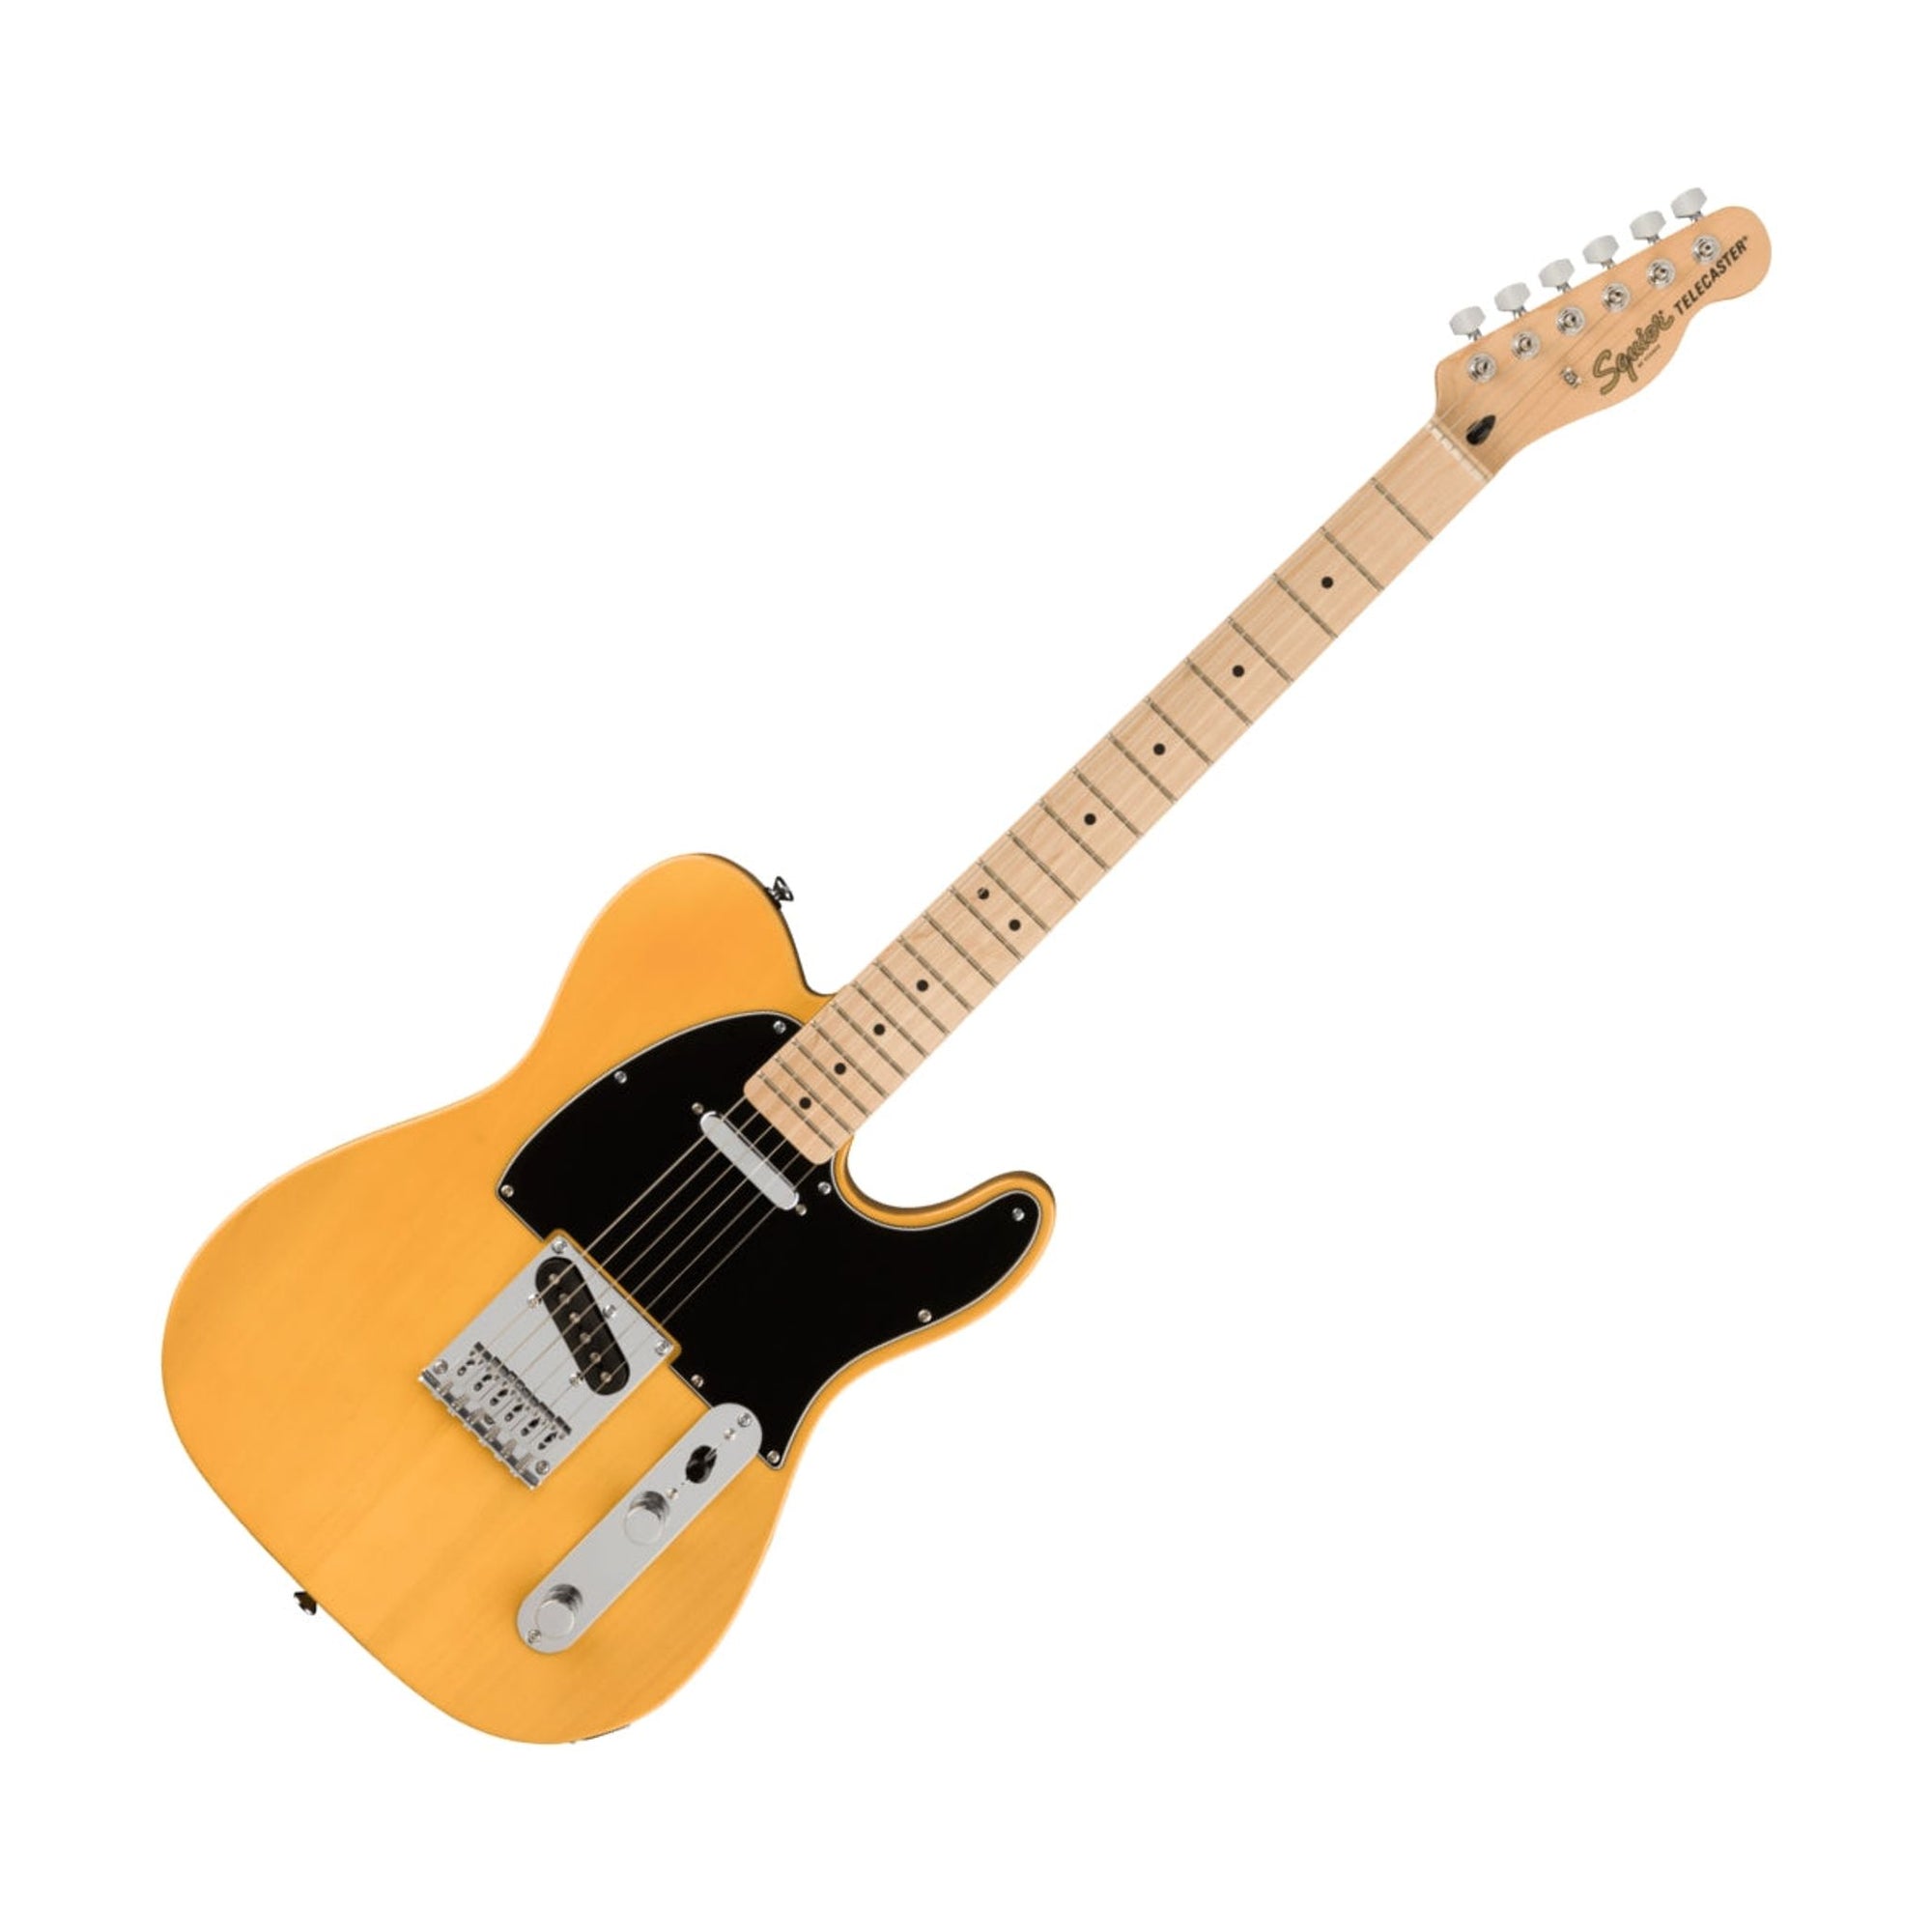 The Fender Squier Telecaster Affinity Series offers a superb gateway into the time-honored Fender family. This Telecaster delivers legendary design and quintessential tone for today’s aspiring guitar hero and is ready to accompany any player at any stage.